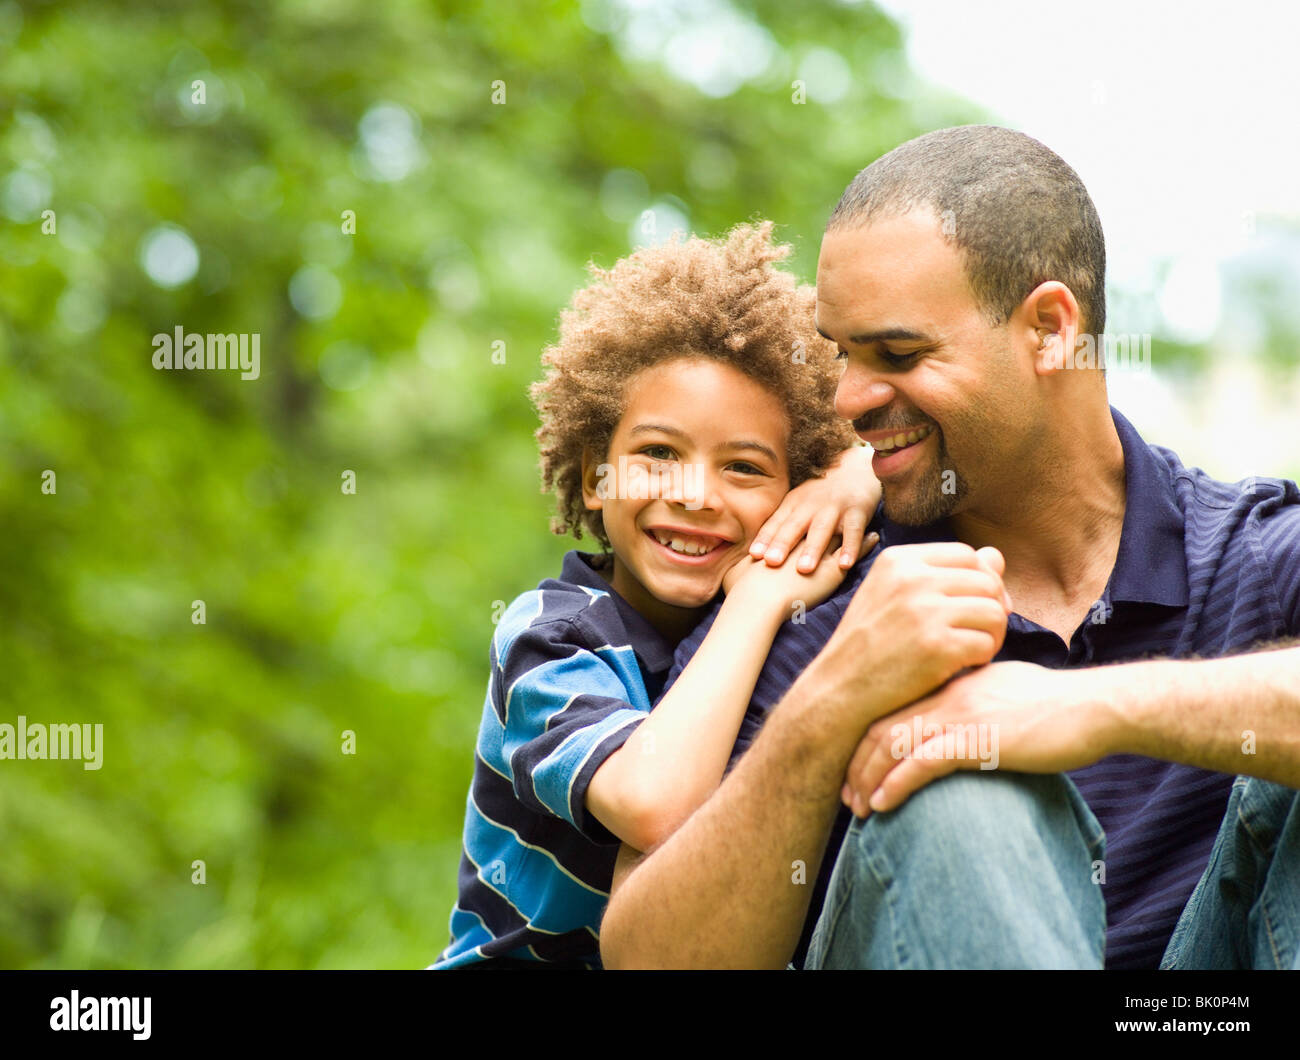 Father and son smiling outdoors Stock Photo